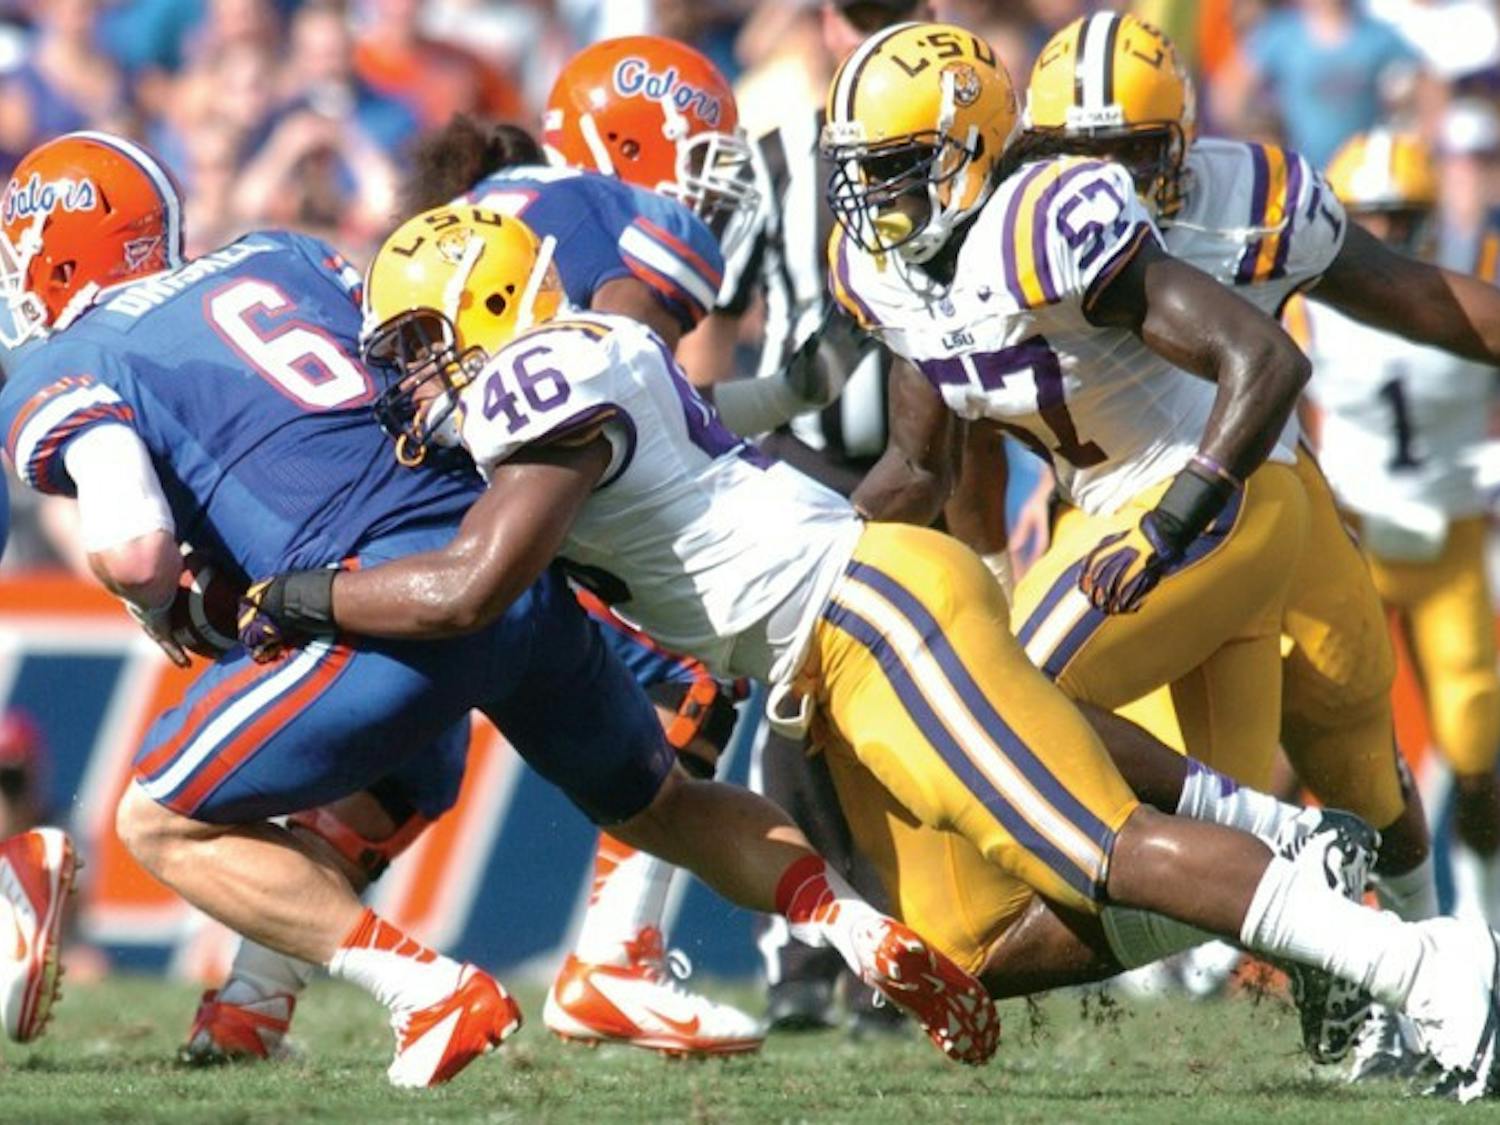 Quarterback Jeff Driskel (6) is sacked by LSU linebacker Kevin Minter (46) during Florida’s 14-6 win on Saturday in Ben Hill Griffin Stadium. Driskel completed 8 of 12 passes for 61 yards. He finished with 1 yard rushing on 13 carries despite losing 43 yards on five sacks.&nbsp;
